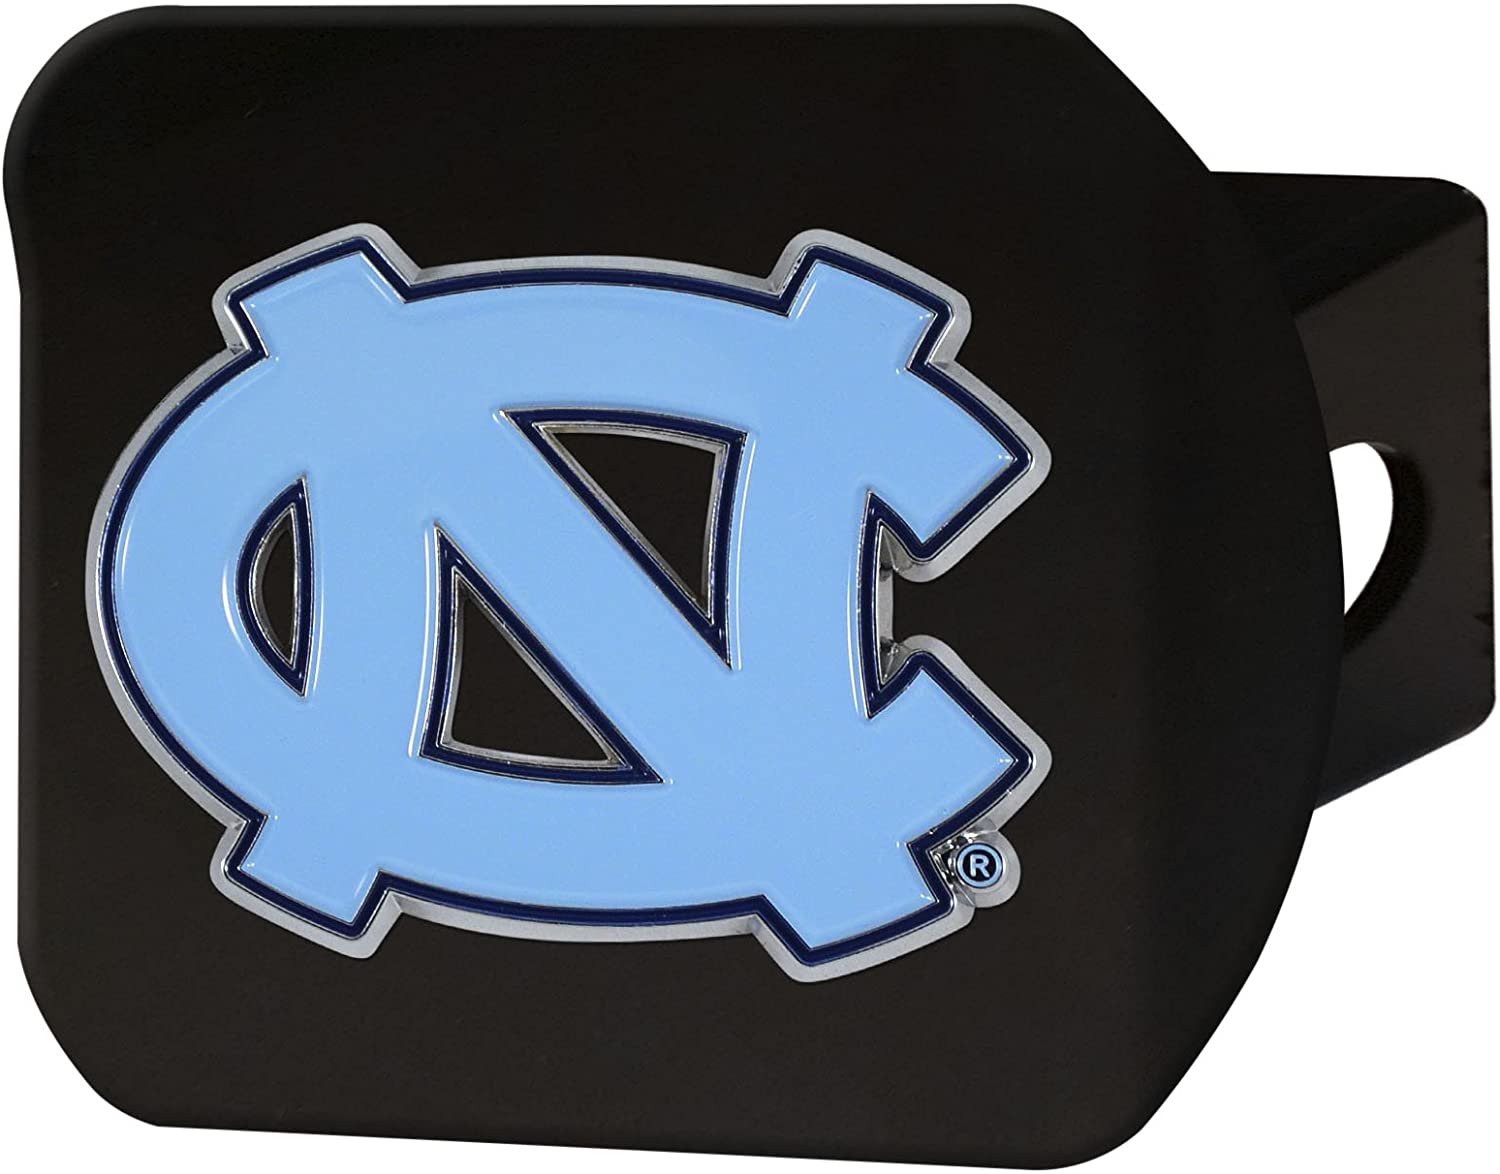 North Carolina Tar Heels Solid Metal Black Hitch Cover with Color Metal Emblem 2 Inch Square Type III University of